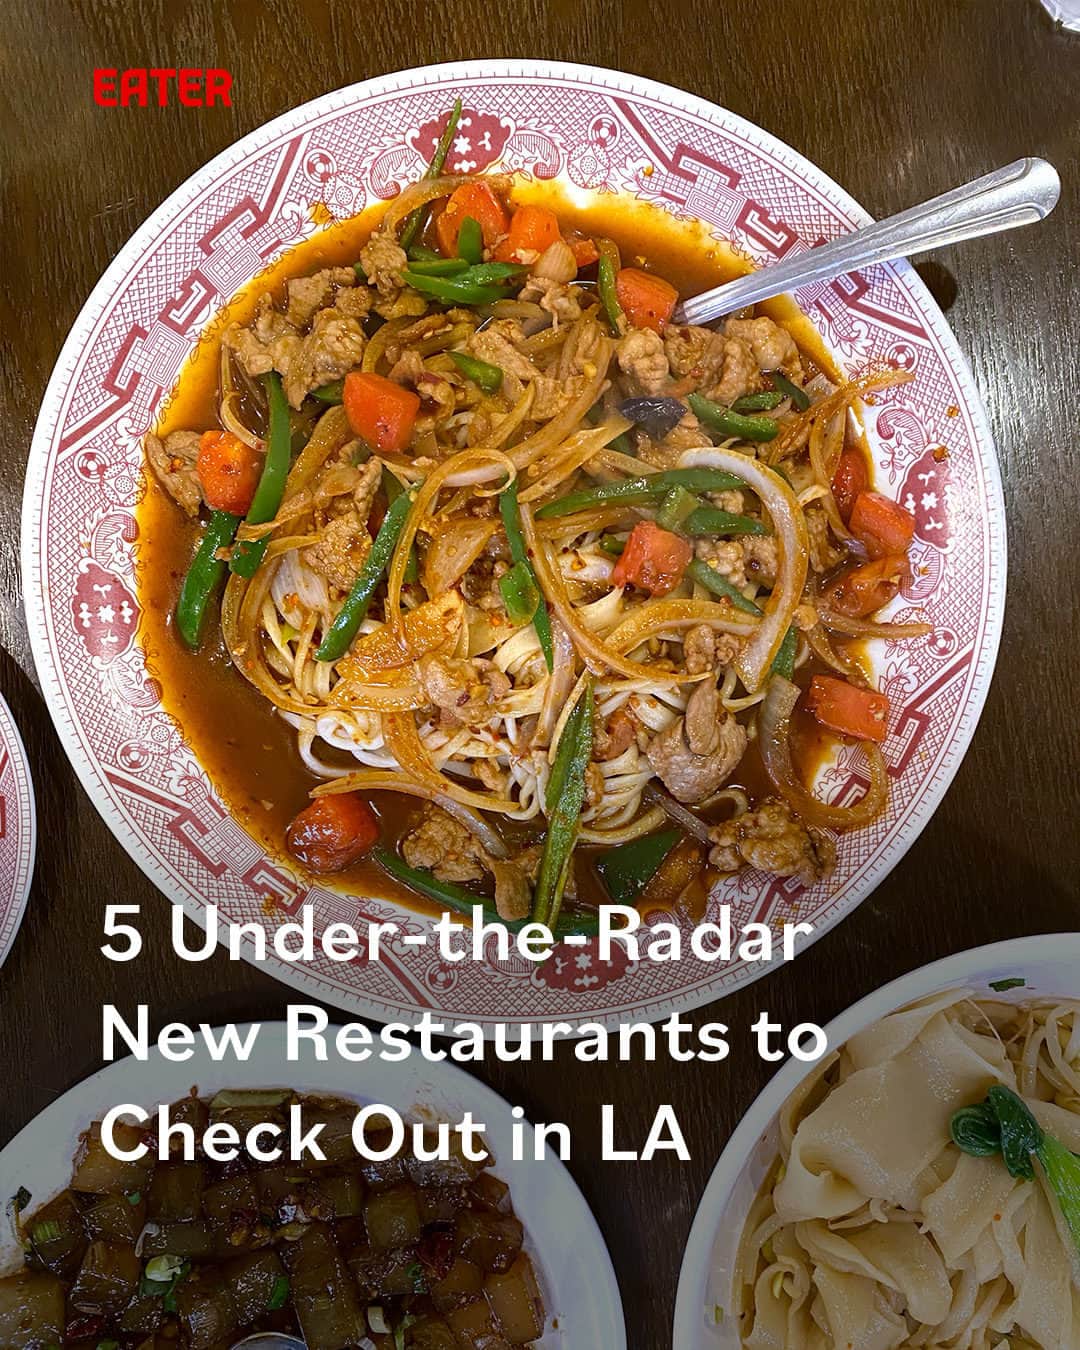 Eater LAのインスタグラム：「Brand new restaurants open every day across the Southland. This periodic compilation spotlights some of the most notable places that have popped up recently. From Parisian pastries in Glendale to late-night bites in Koreatown, tap the link in bio for five under-the-radar restaurants to check out in LA right now by Eater LA senior reporter/editor Cathy Chaplin (@gastronomyblog).  📸: @gastronomyblog」